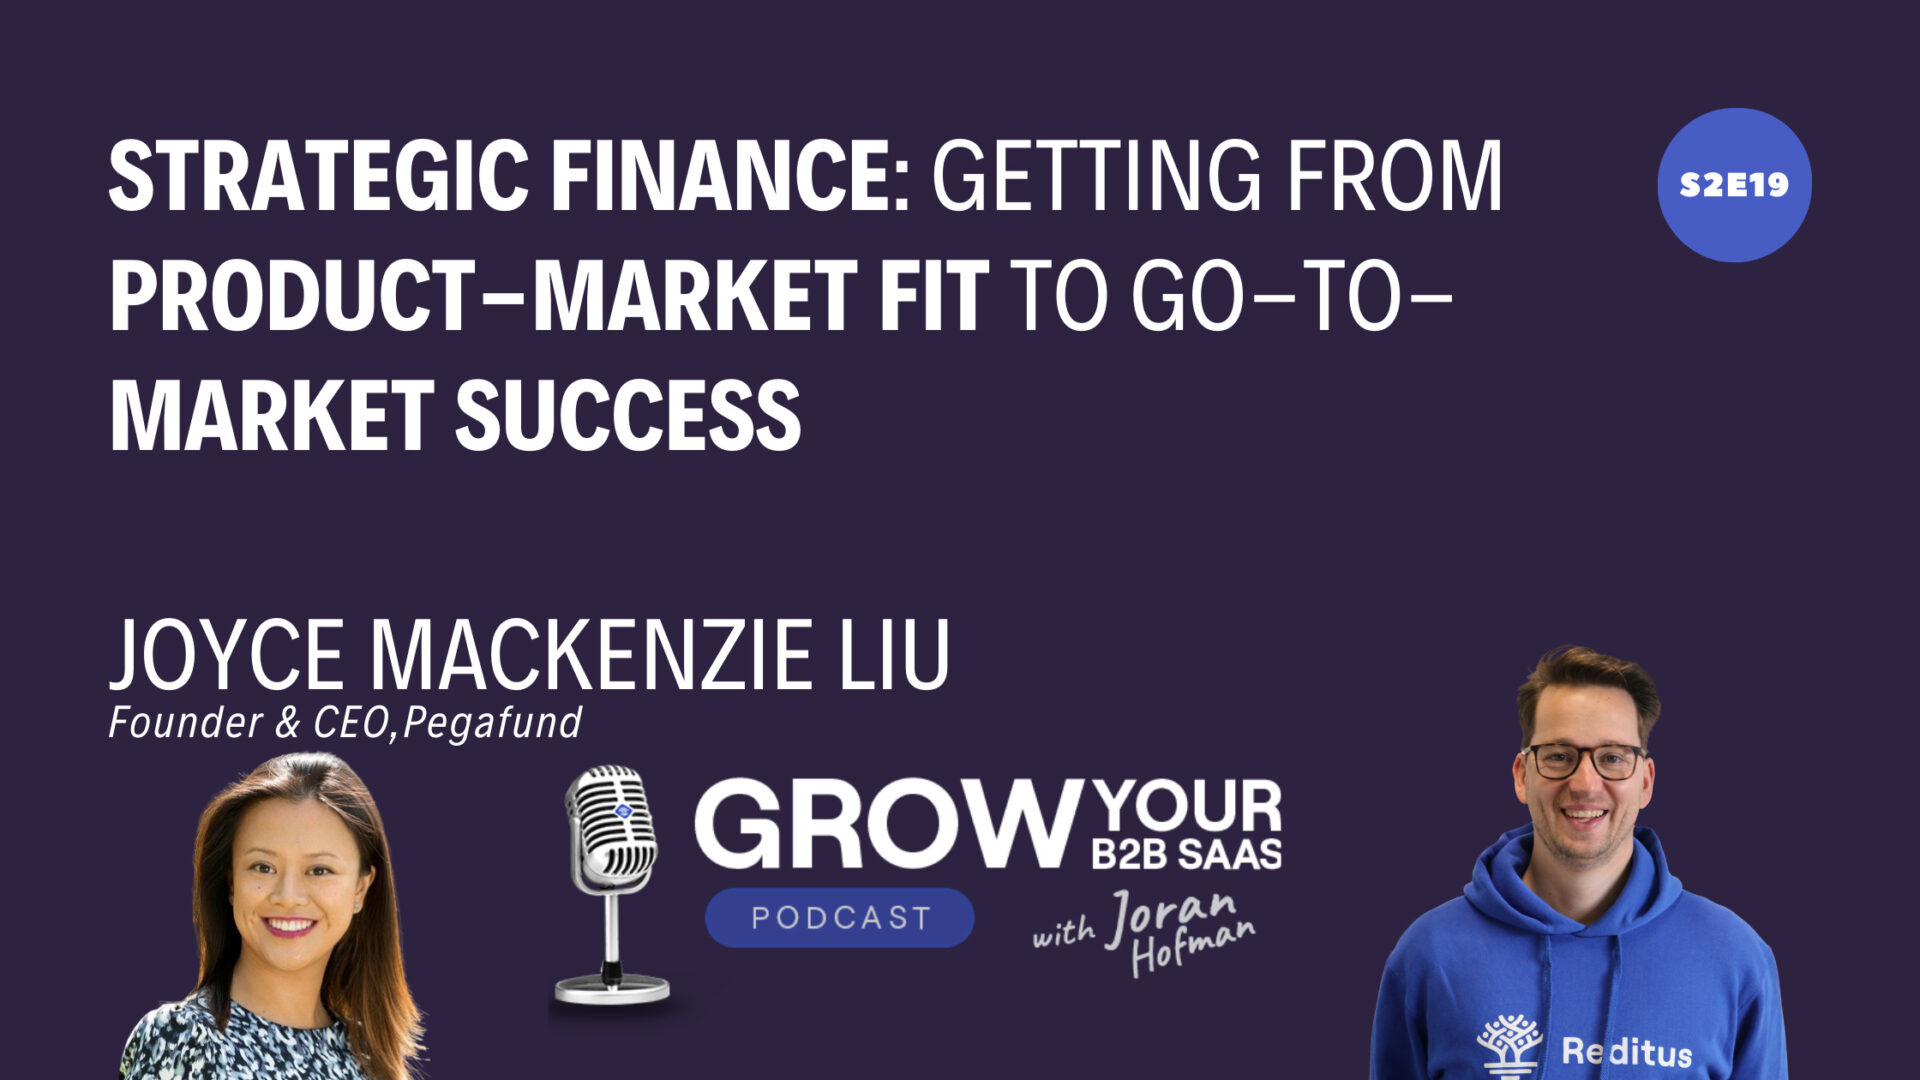 https://www.getreditus.com/podcast/s2e19-strategic-finance-getting-from-product-market-fit-to-go-to-market-success/